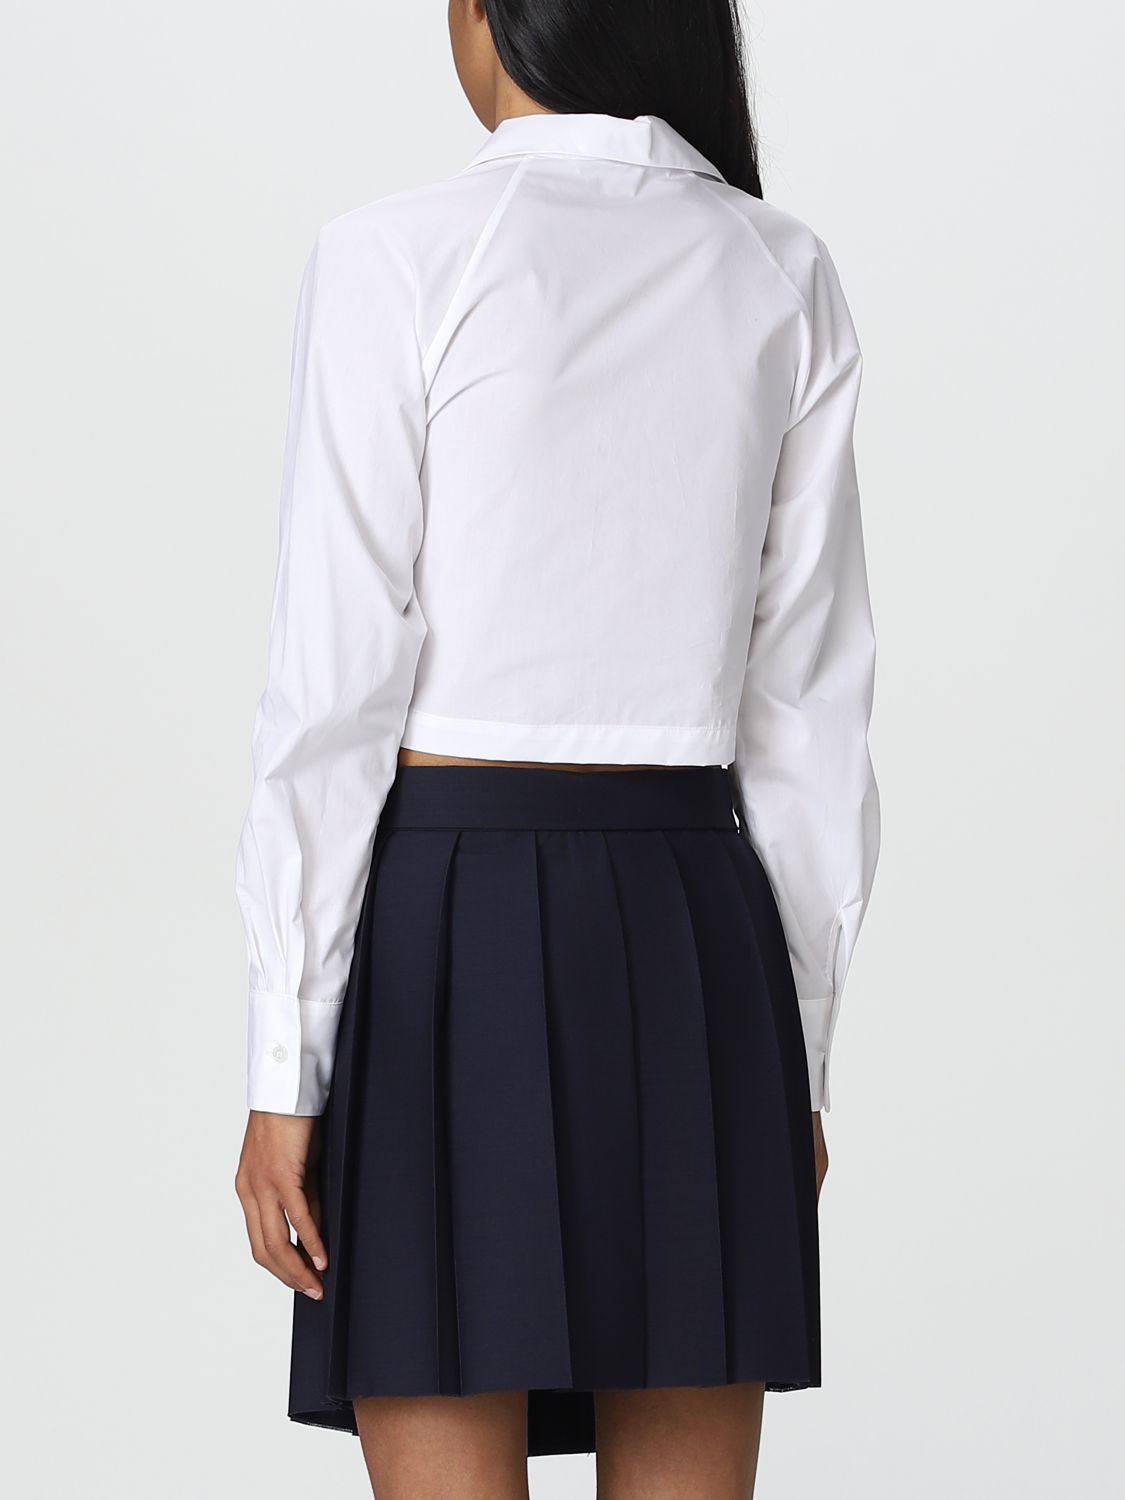 GRIFONI: shirt for woman - White | Grifoni shirt 2201311 online on ...